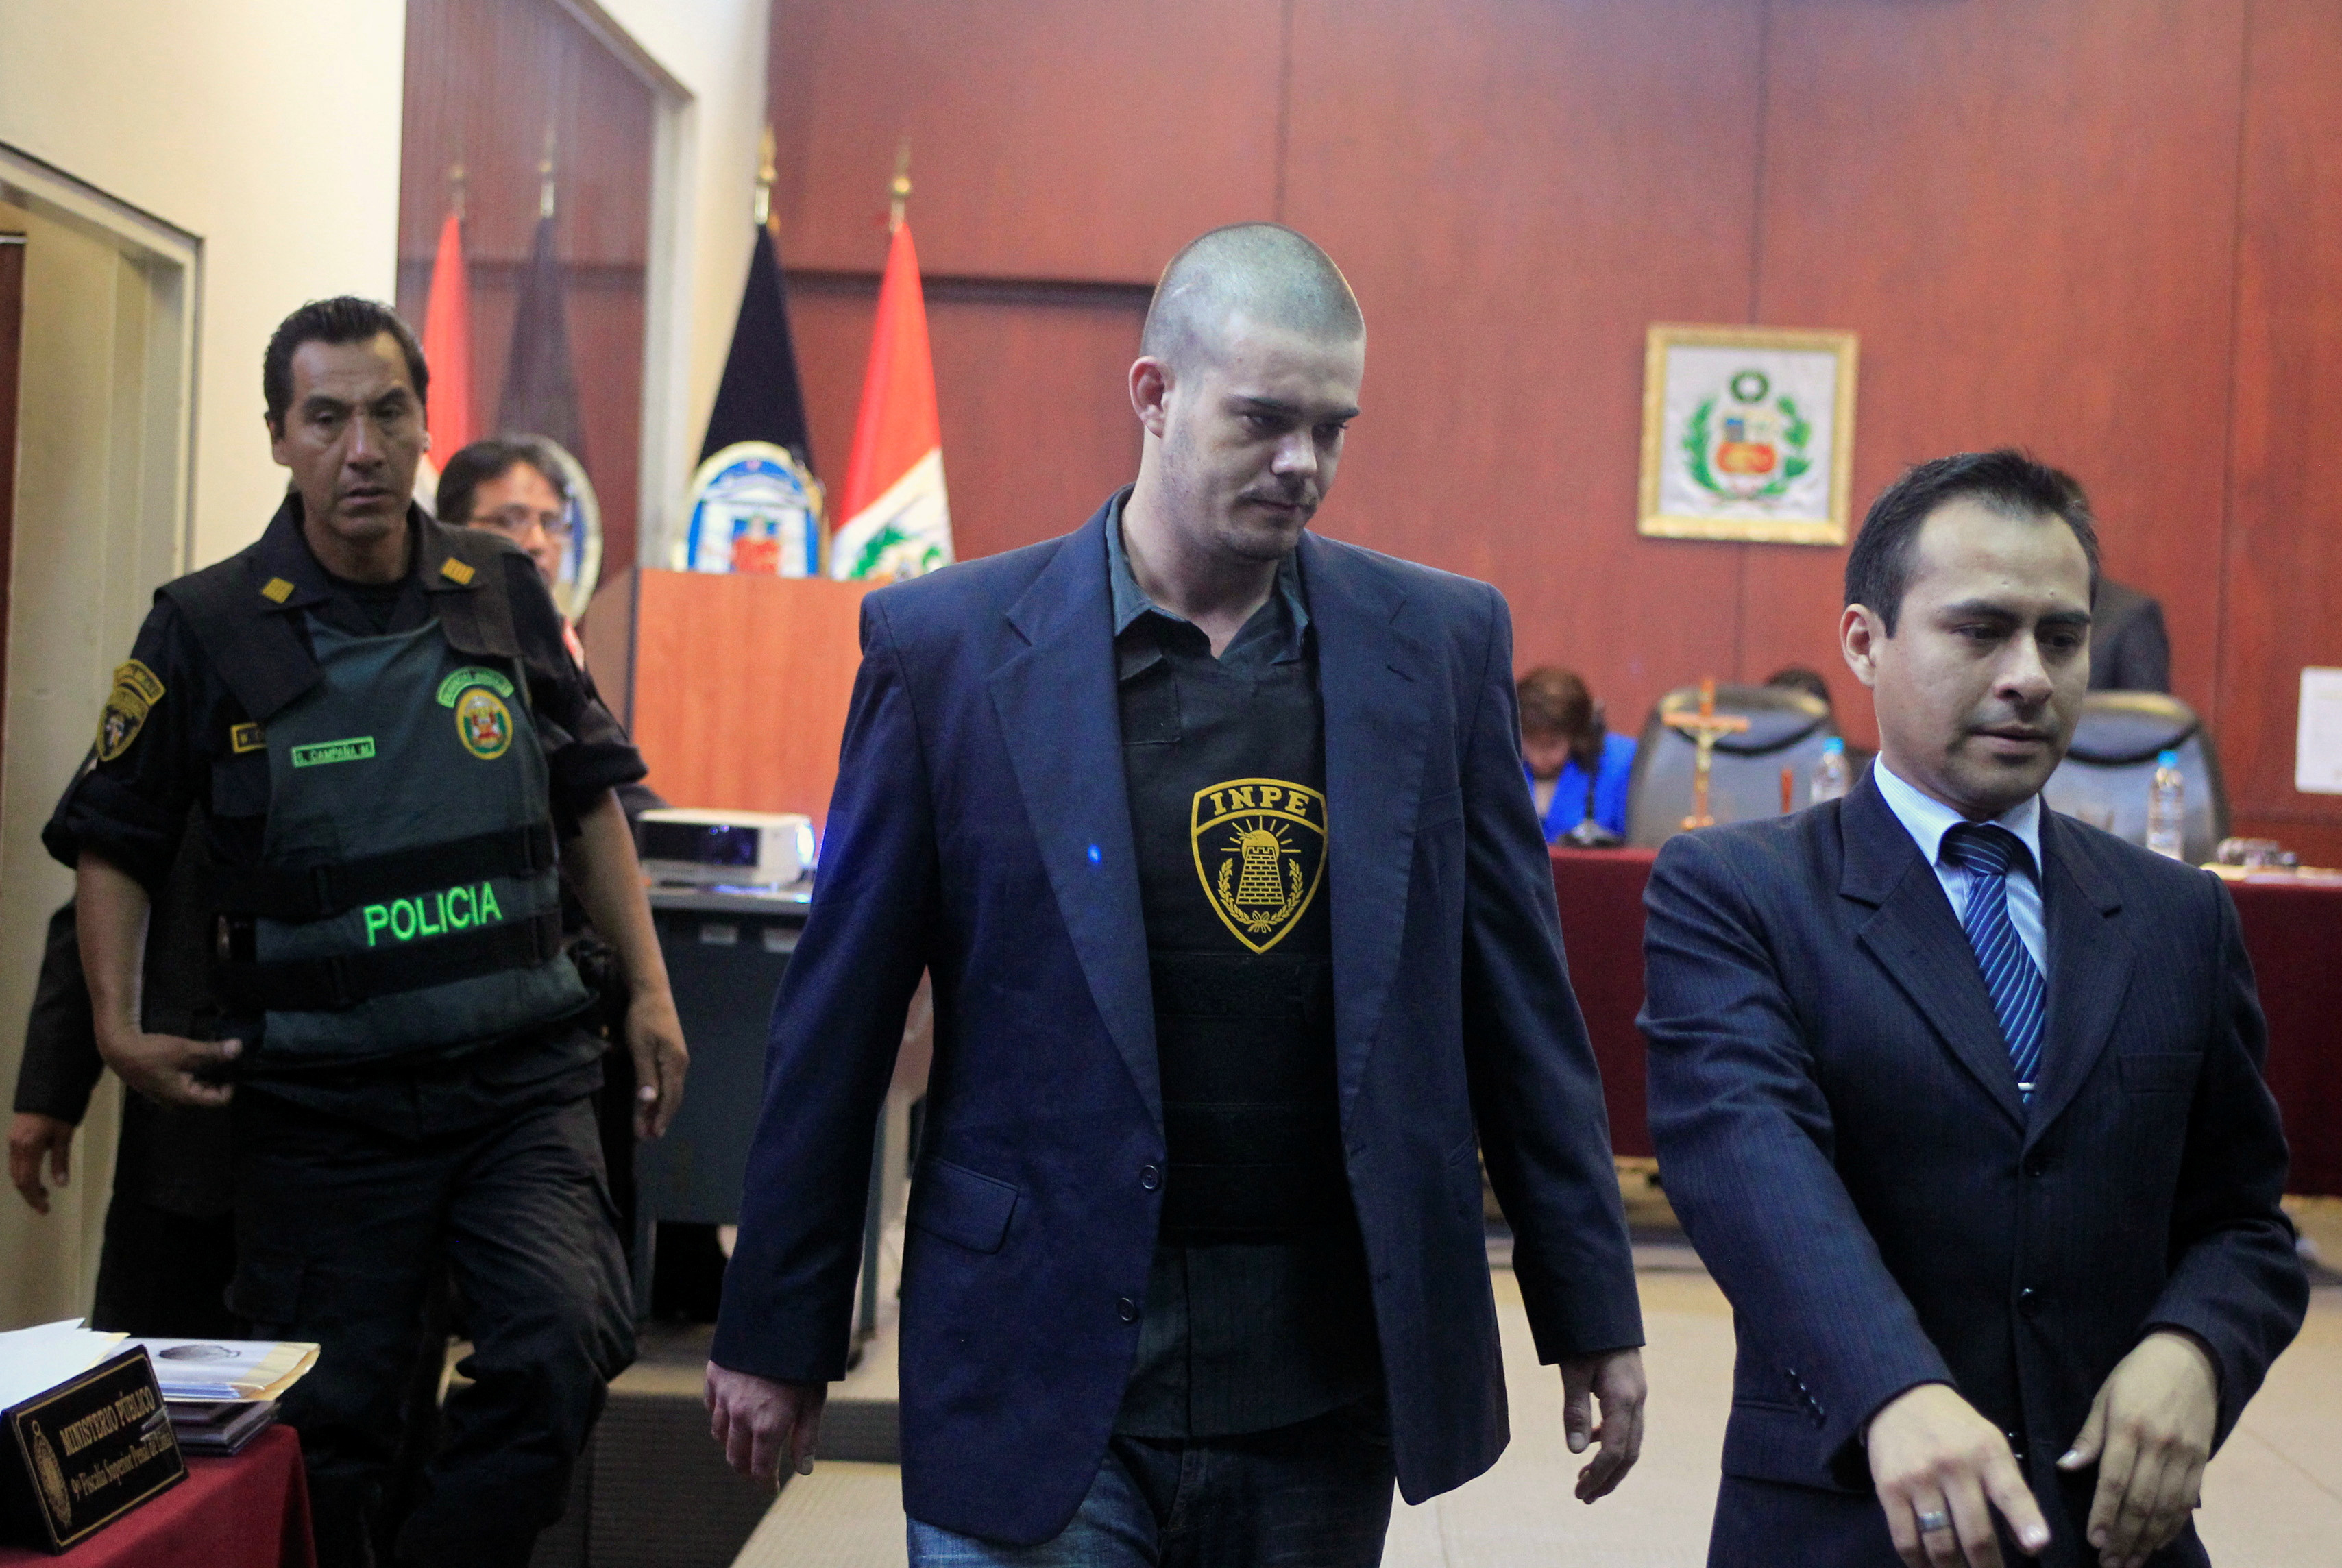 Dutch citizen Van der Sloot enters the courtroom at the Lurigancho prison in Lima